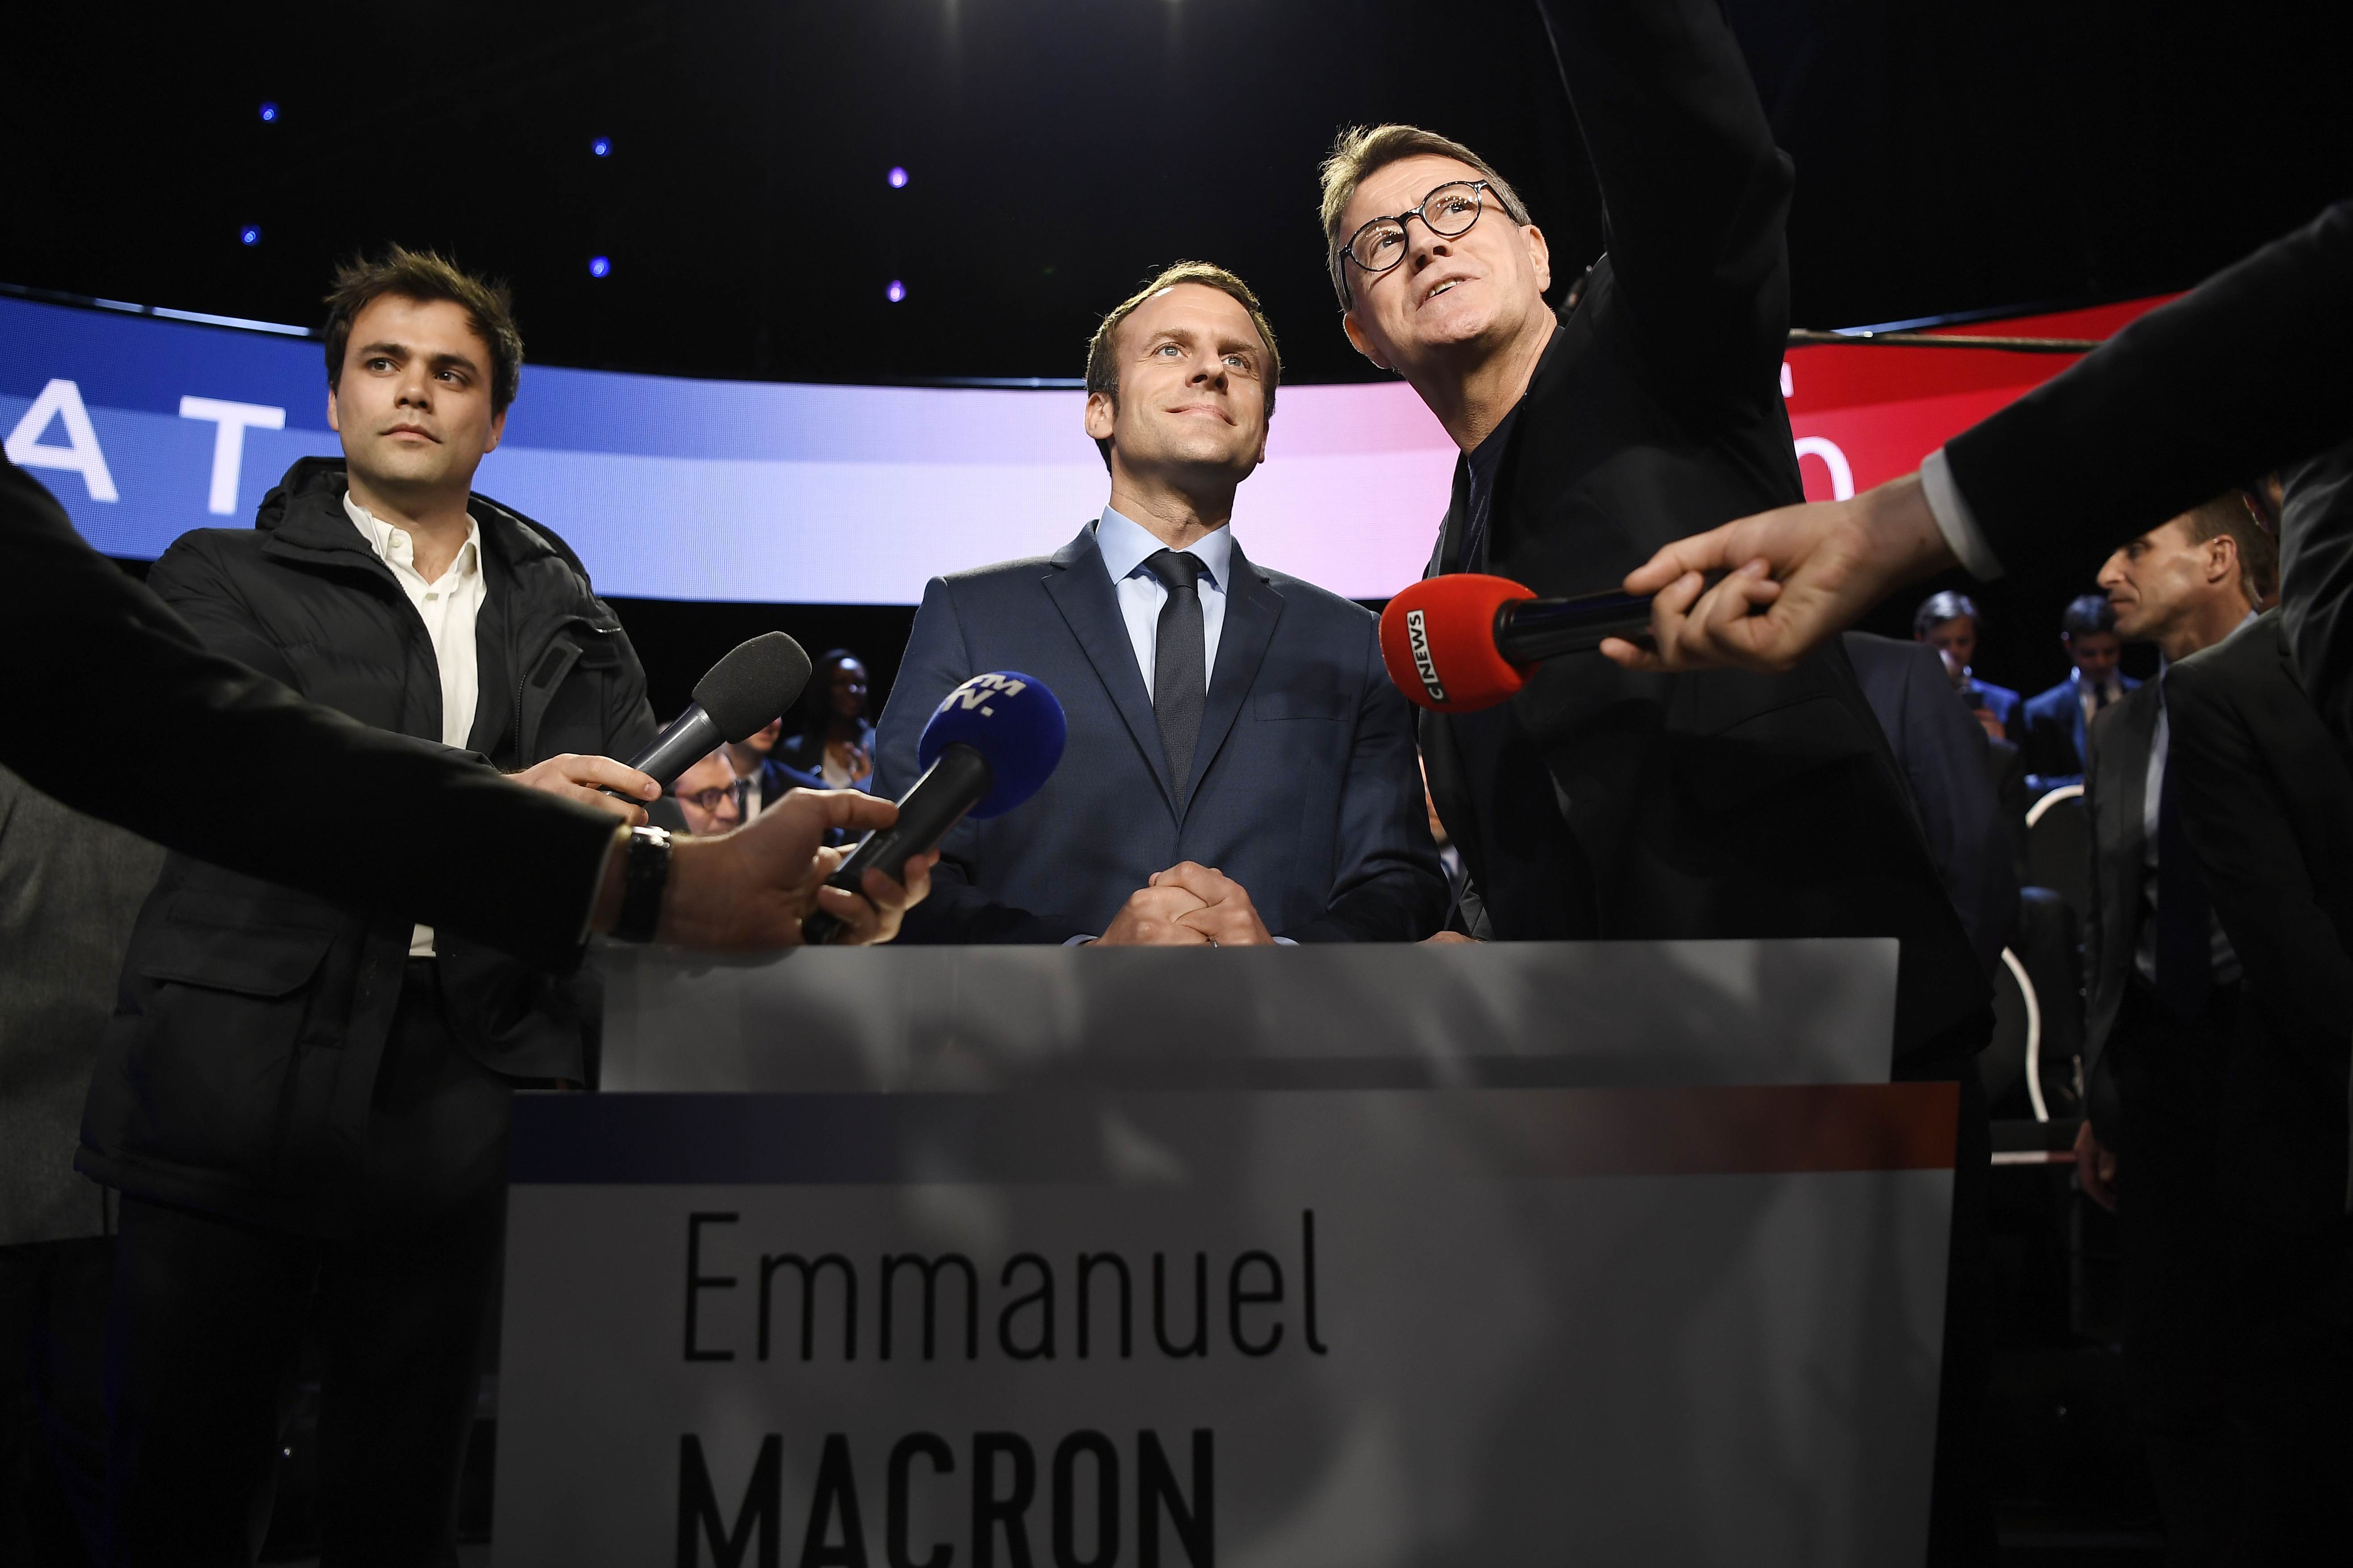 French candidates go head to head in TV debate with Macron favourite